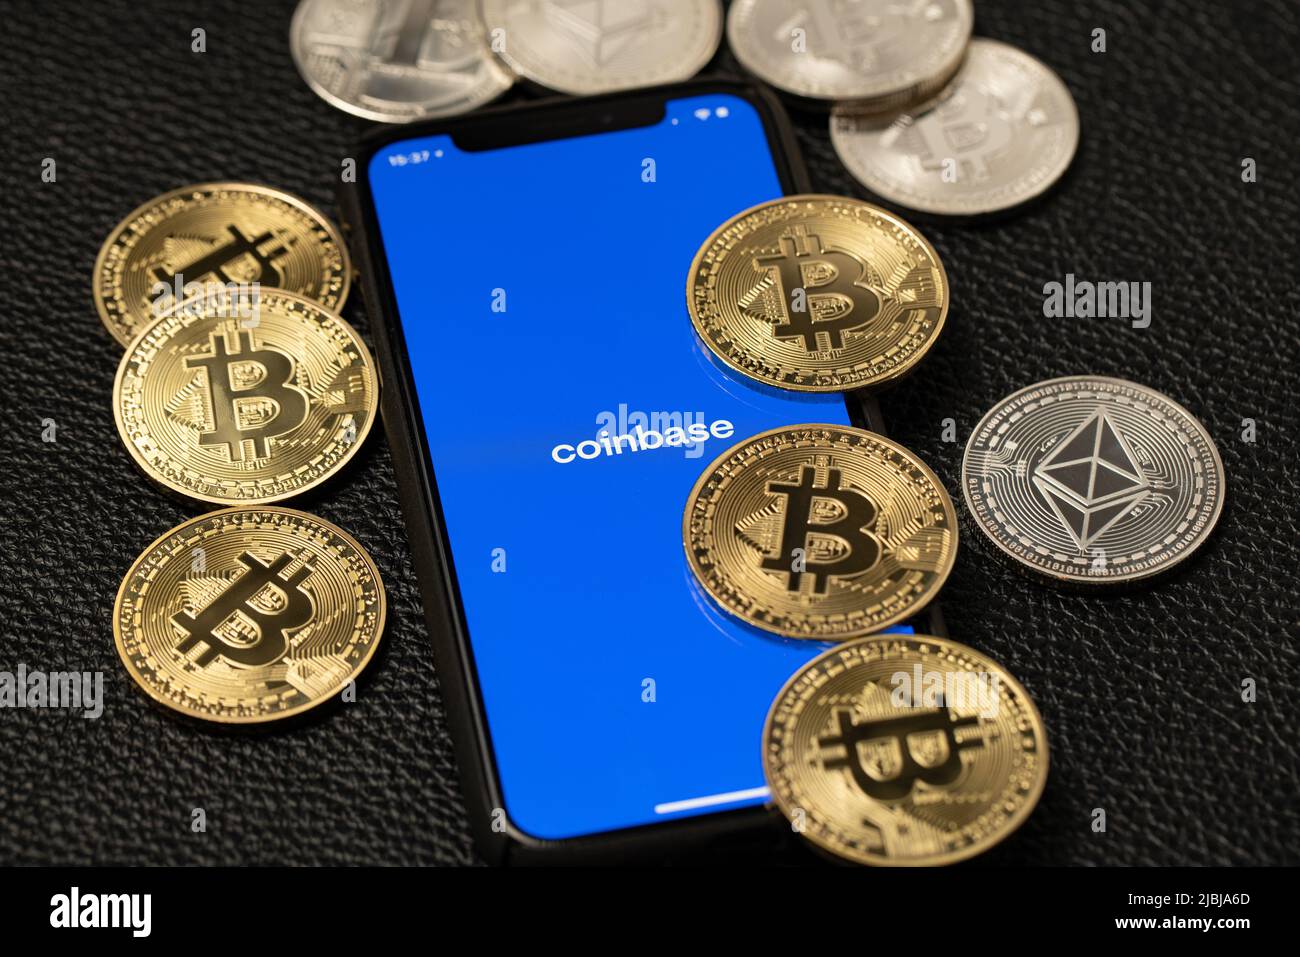 Bolzano, Italy - April 10. 2021: Coinbase app on smartphone next to bitcoin and ethereum coins on leather background Stock Photo